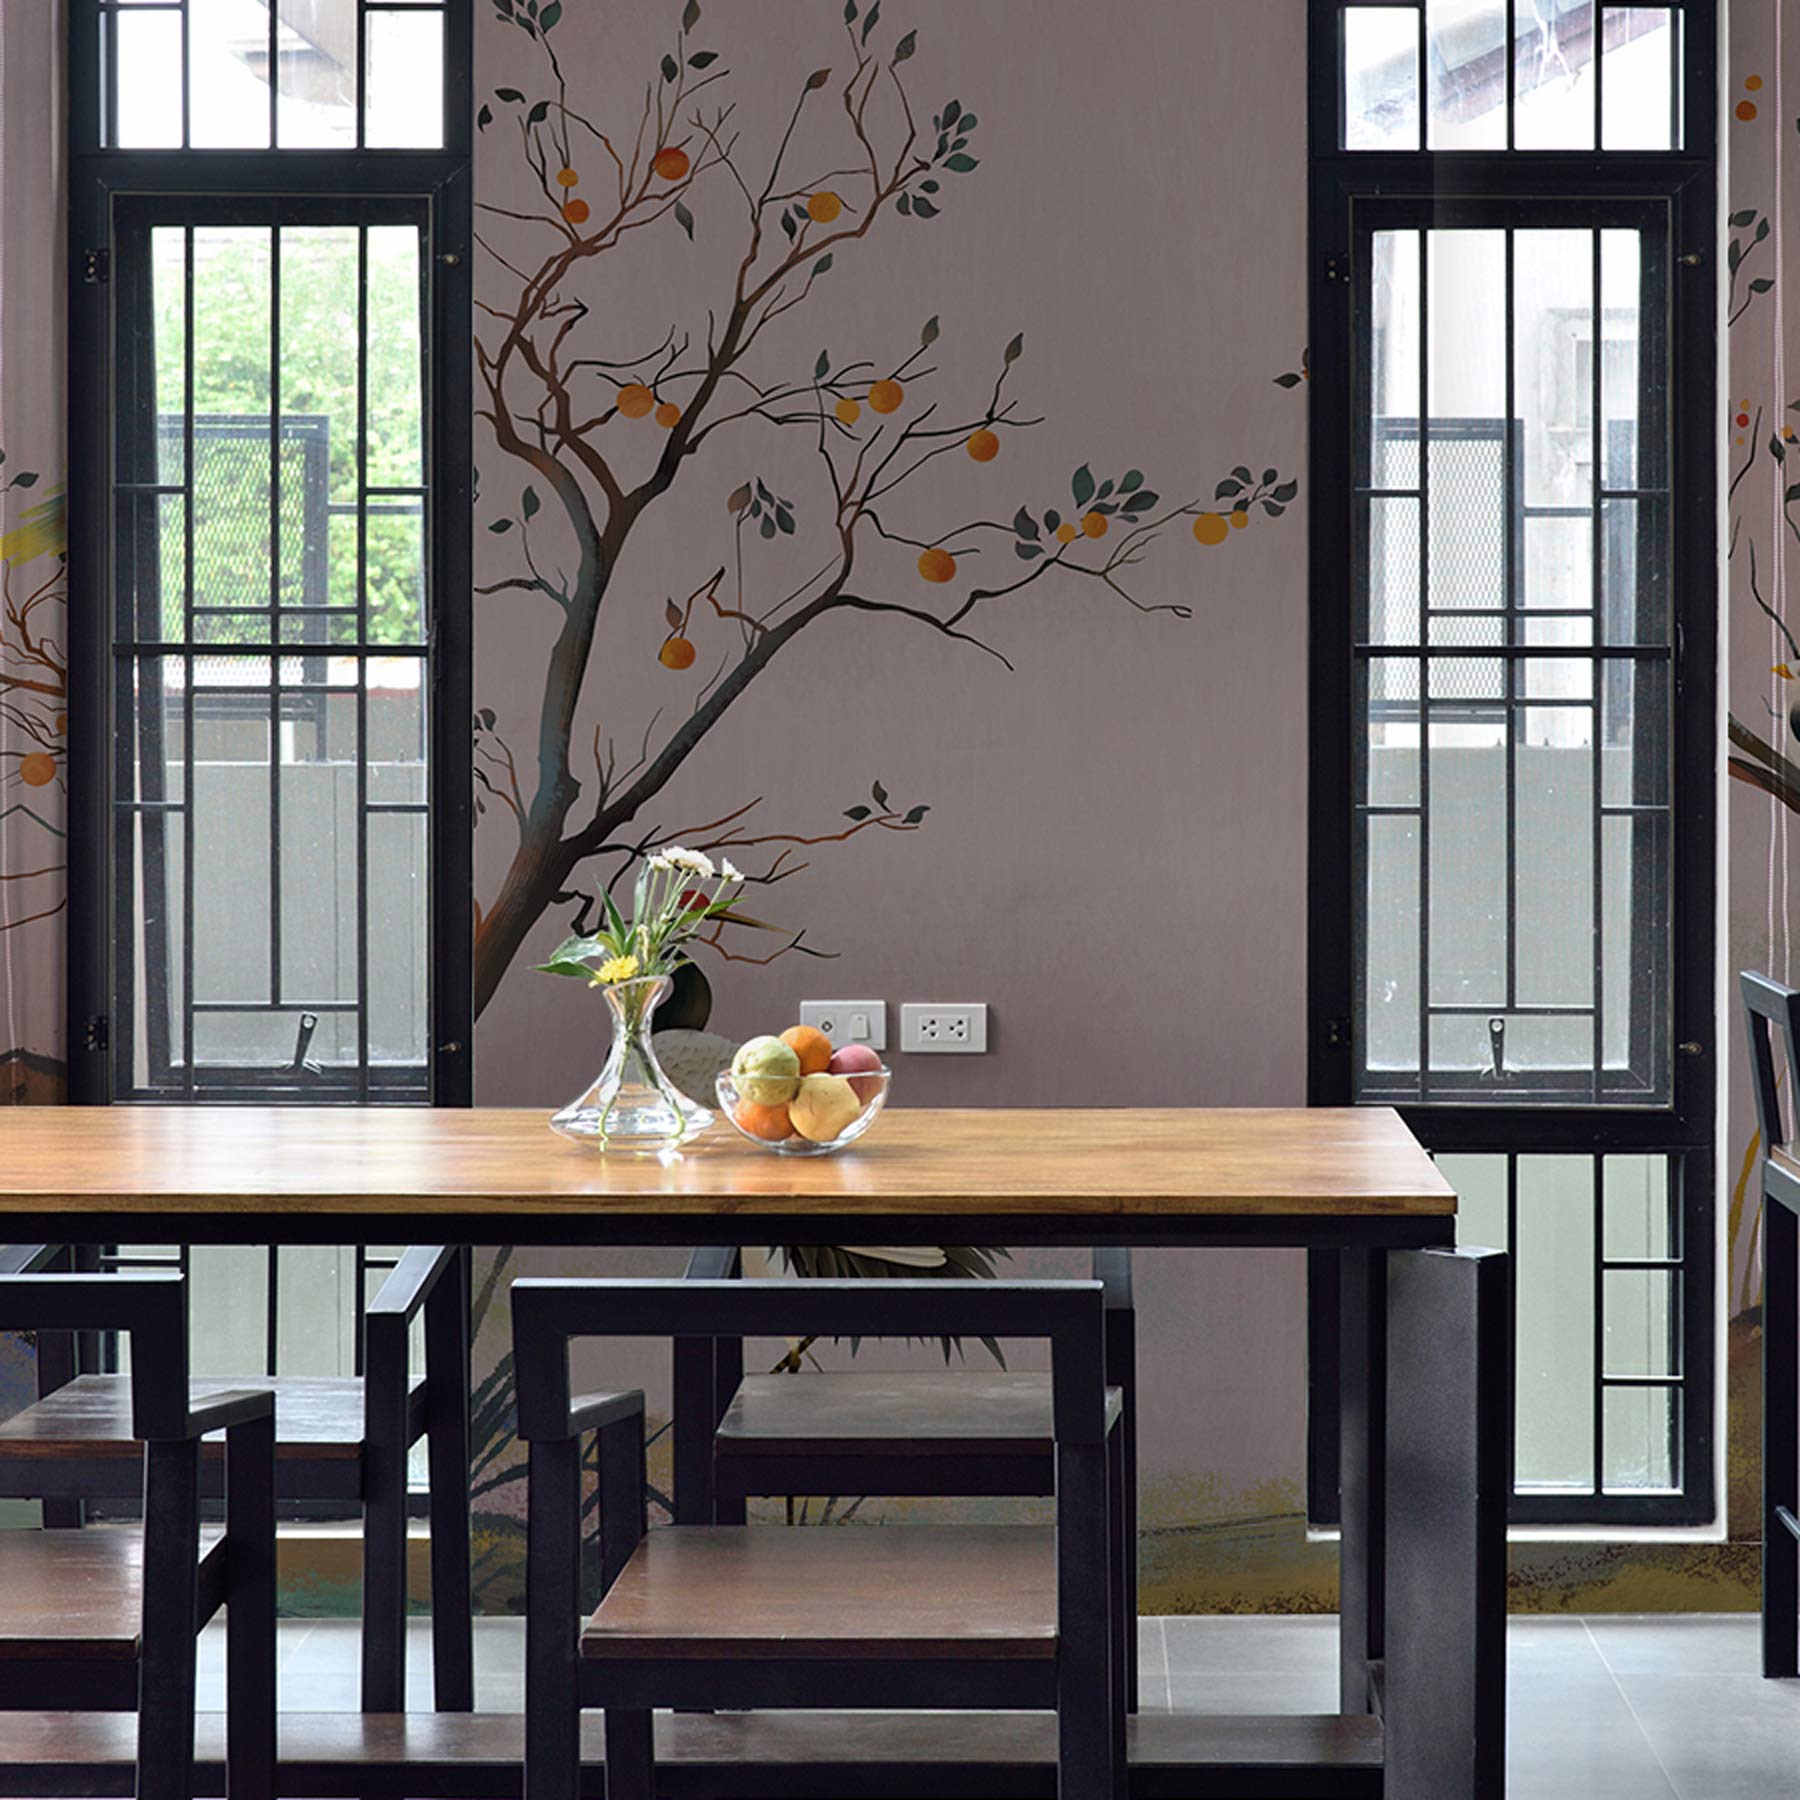 Wallpaper mural with Birds and Trees in Autumn for Use in Decorating the Dining Room